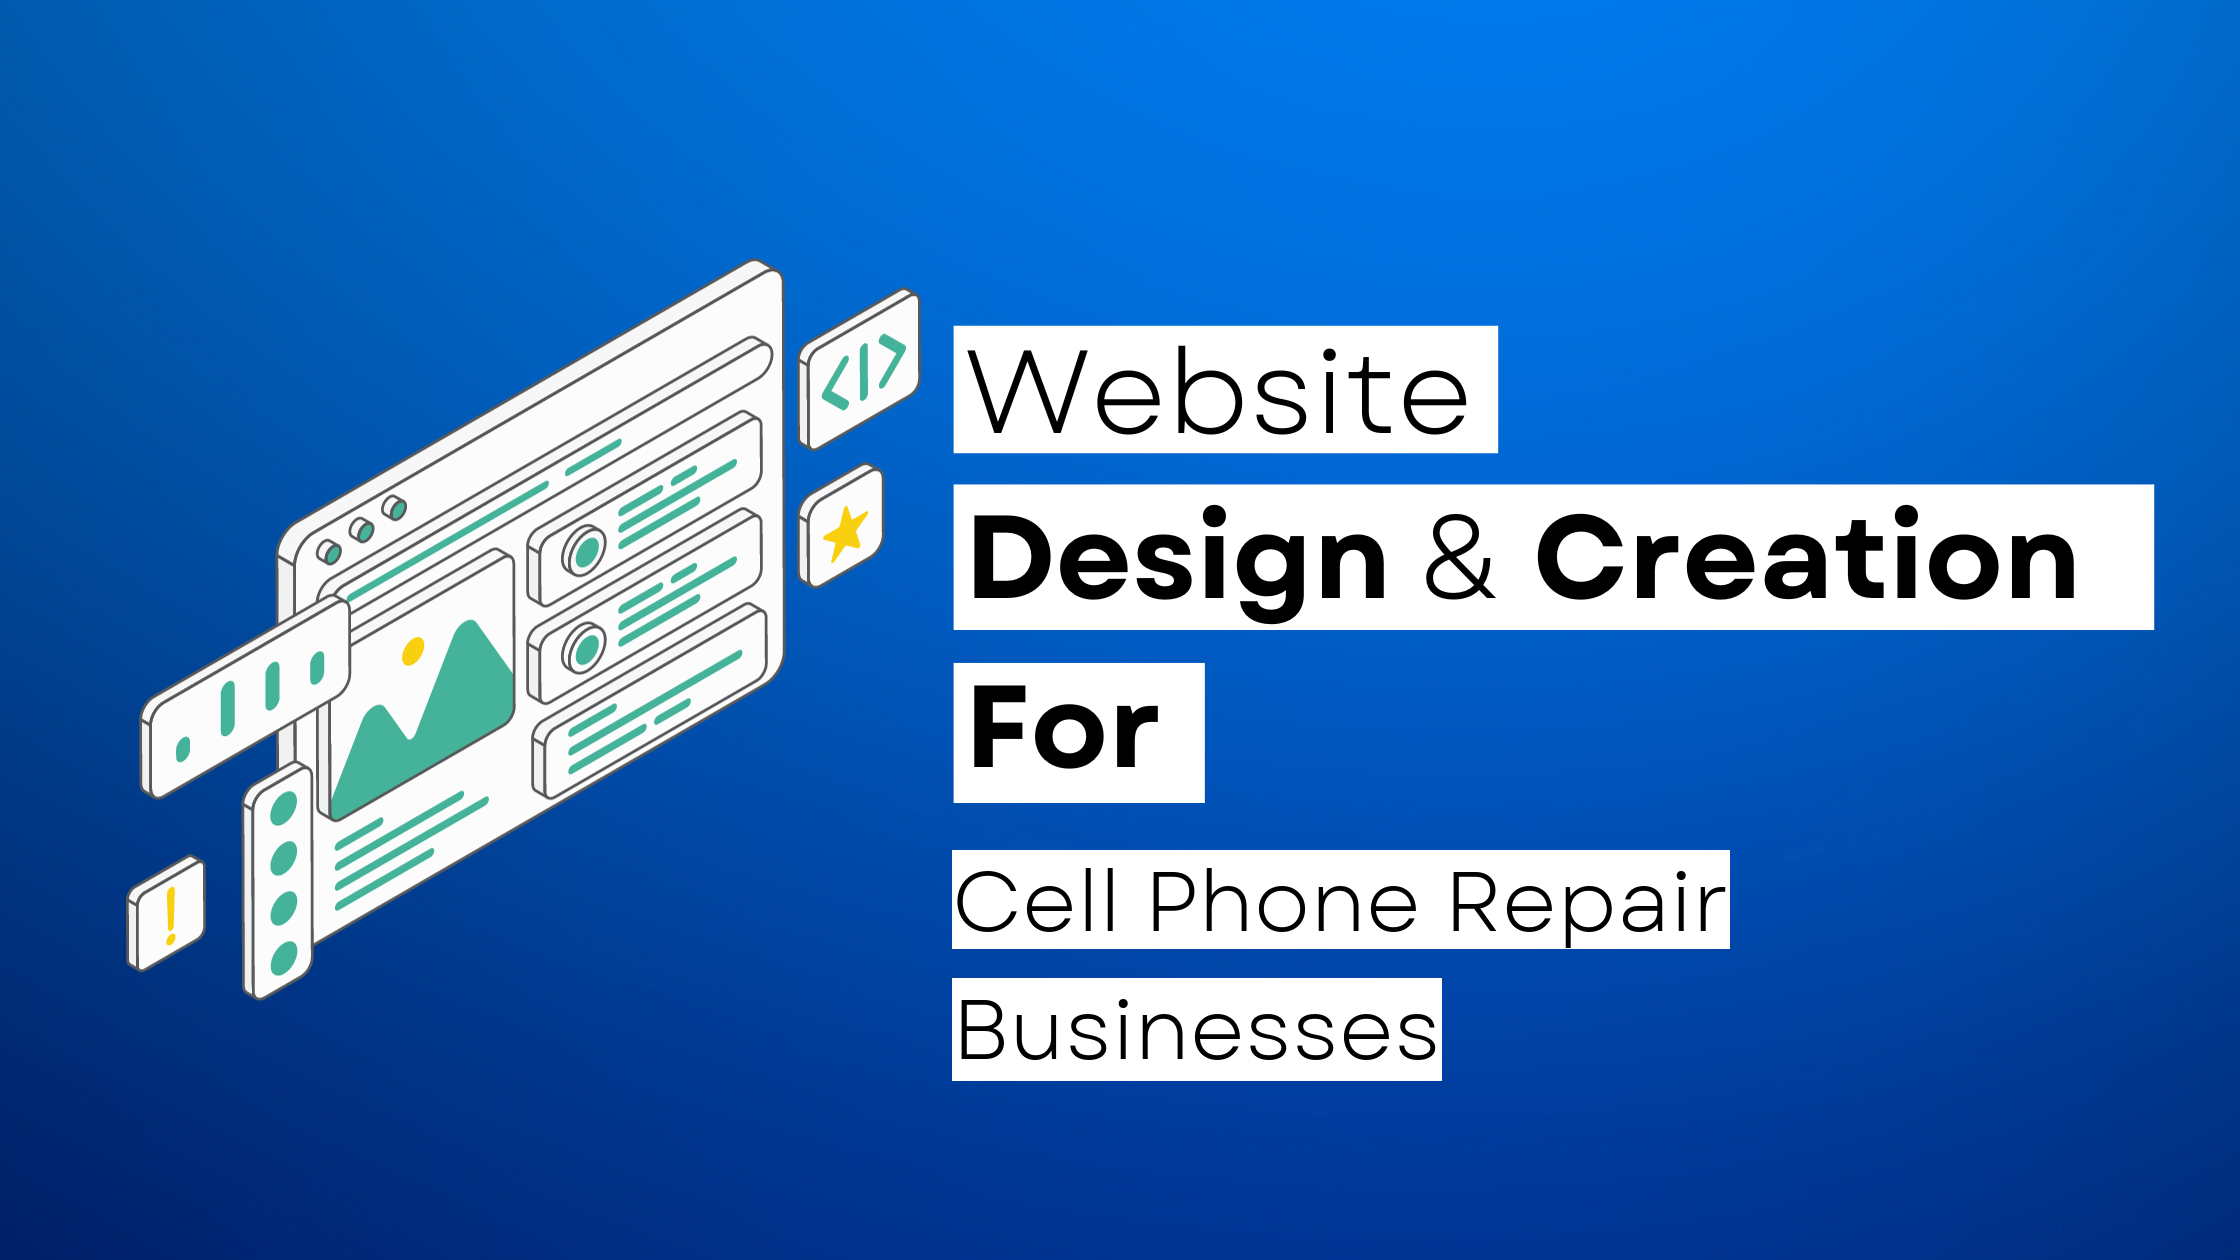 How to start a Cell Phone Repair website